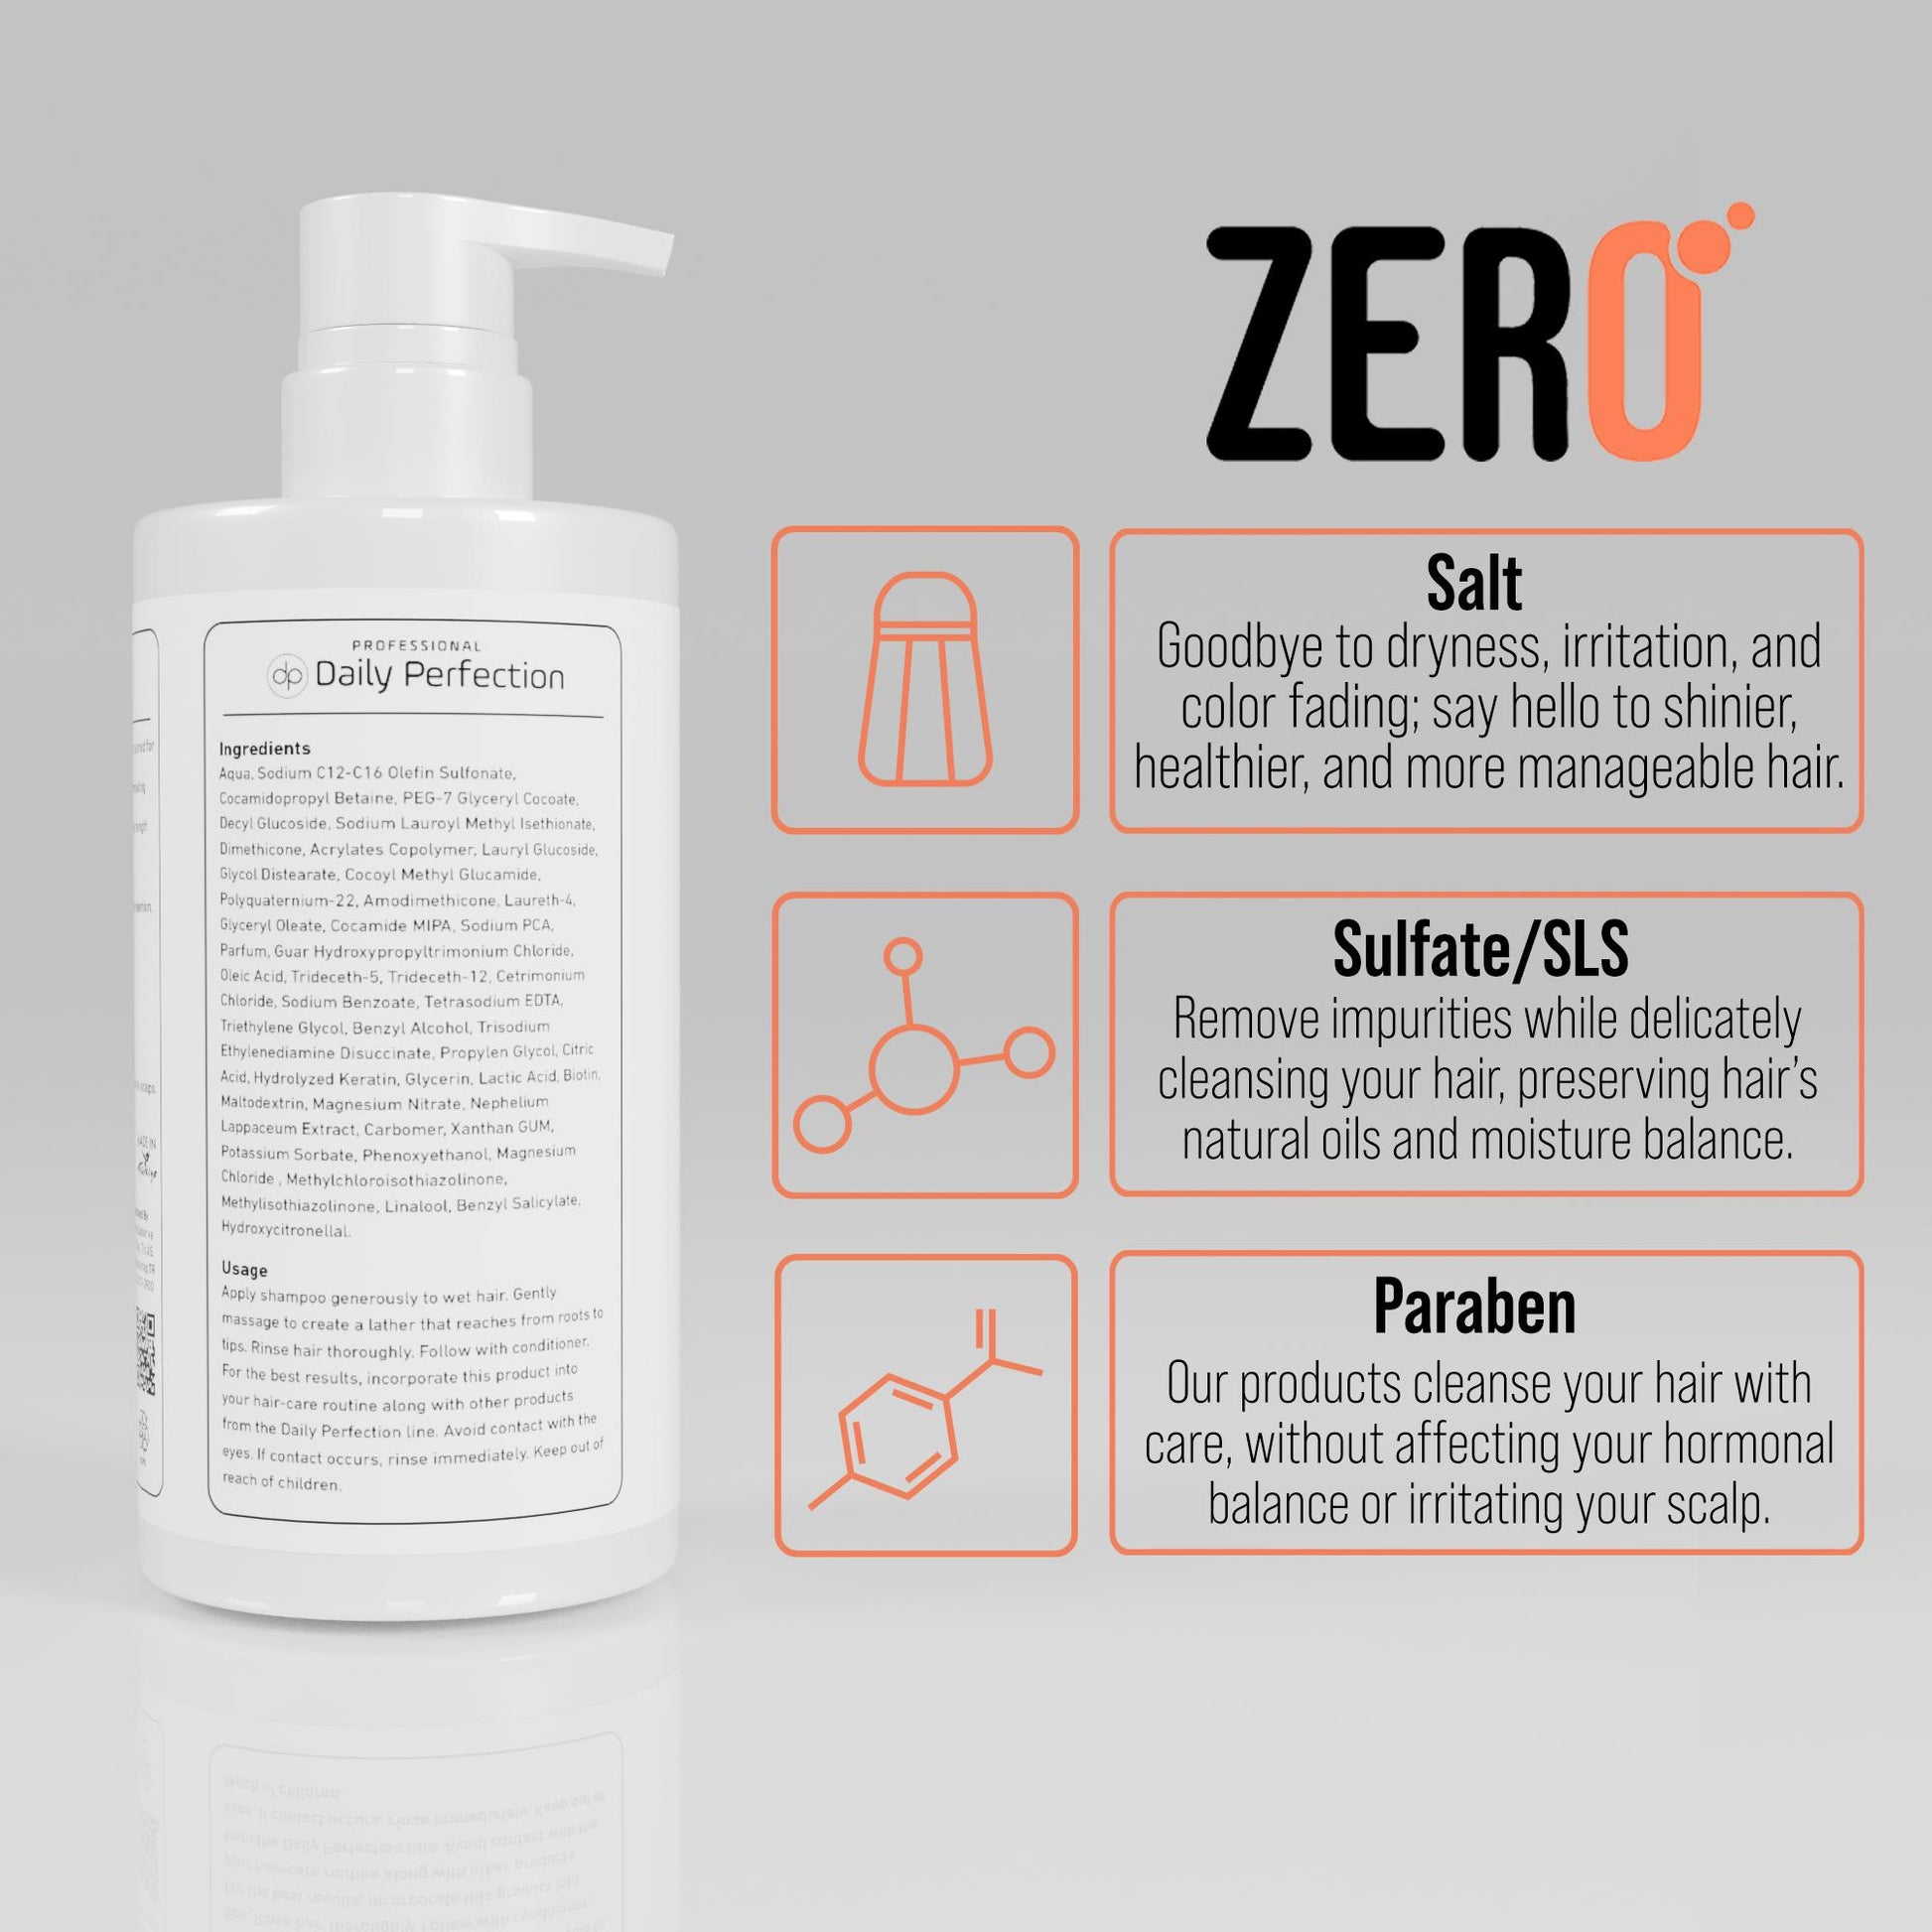 infographic explains the benefits of salt free,sulfate free, paraben free formula that is used in Daily Perfection Detox Shampoo